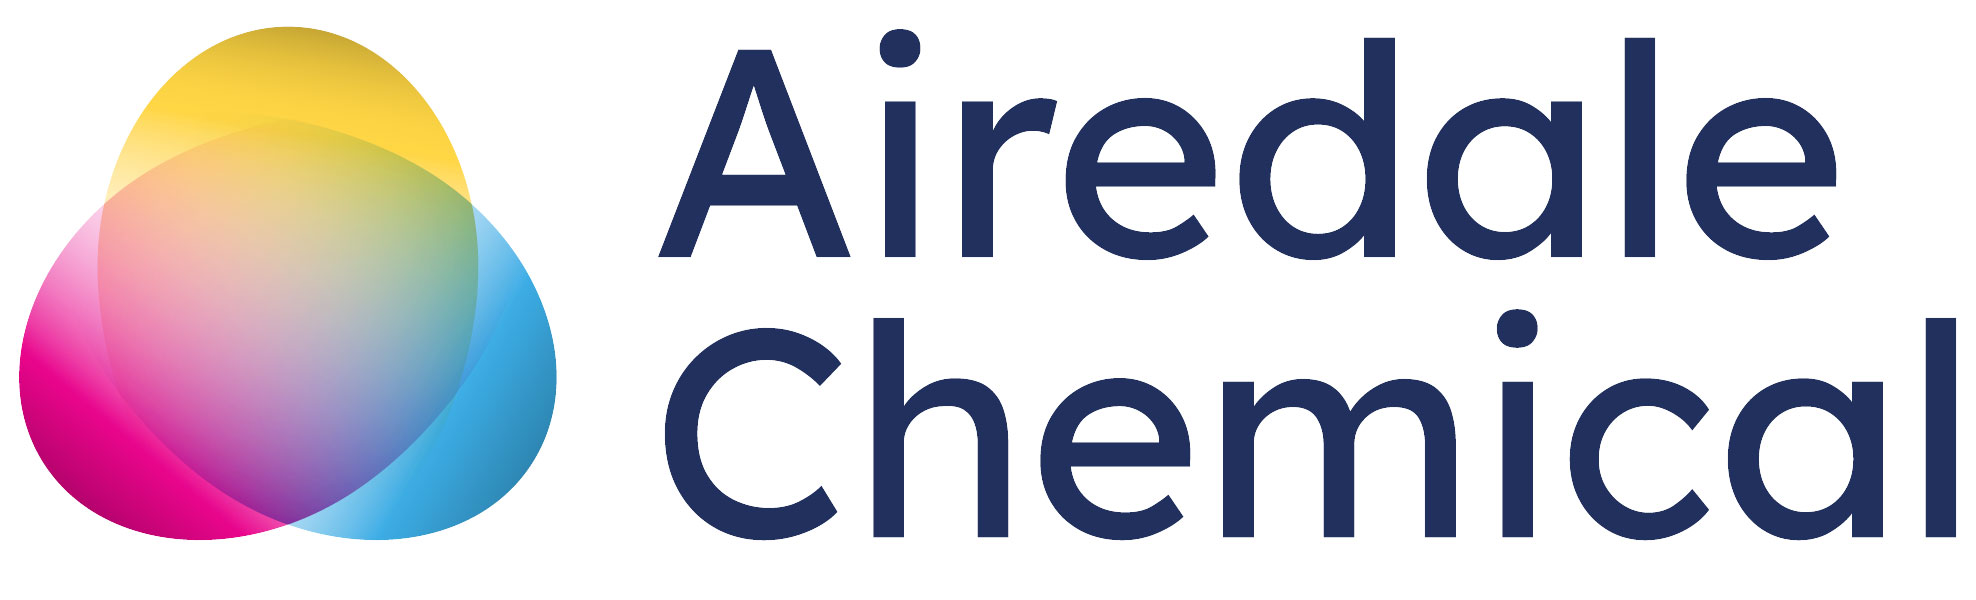 Airedale Chemical Company Ltd